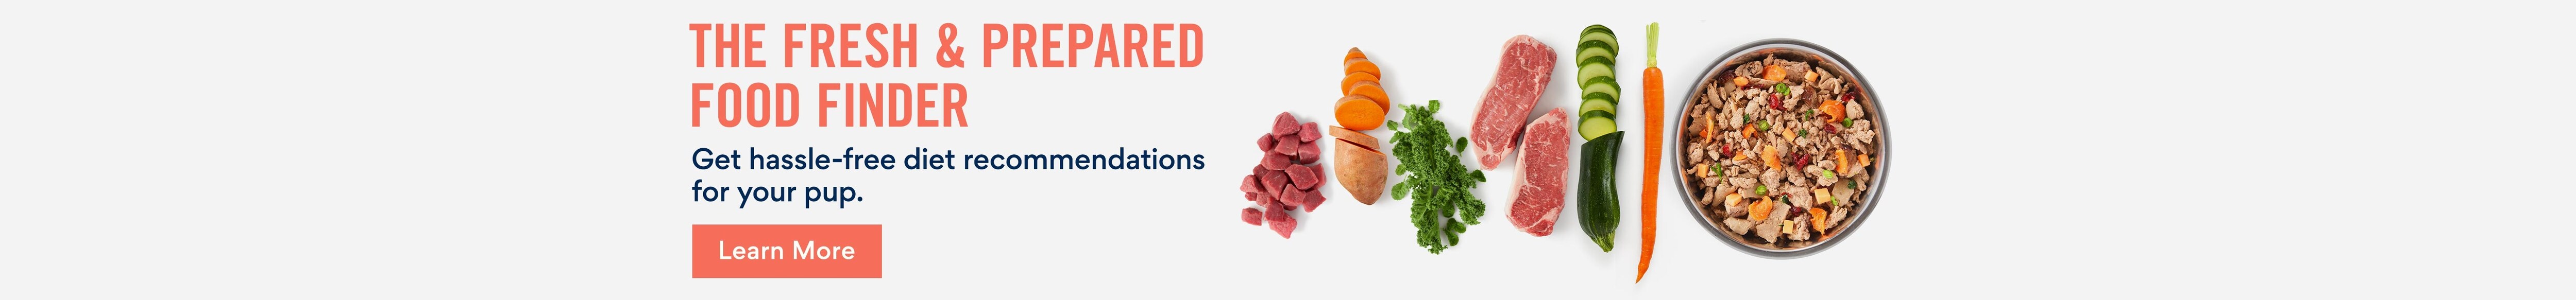 The fresh & prepared food finder. Get hassle-free diet recommendations for your pup. Learn More